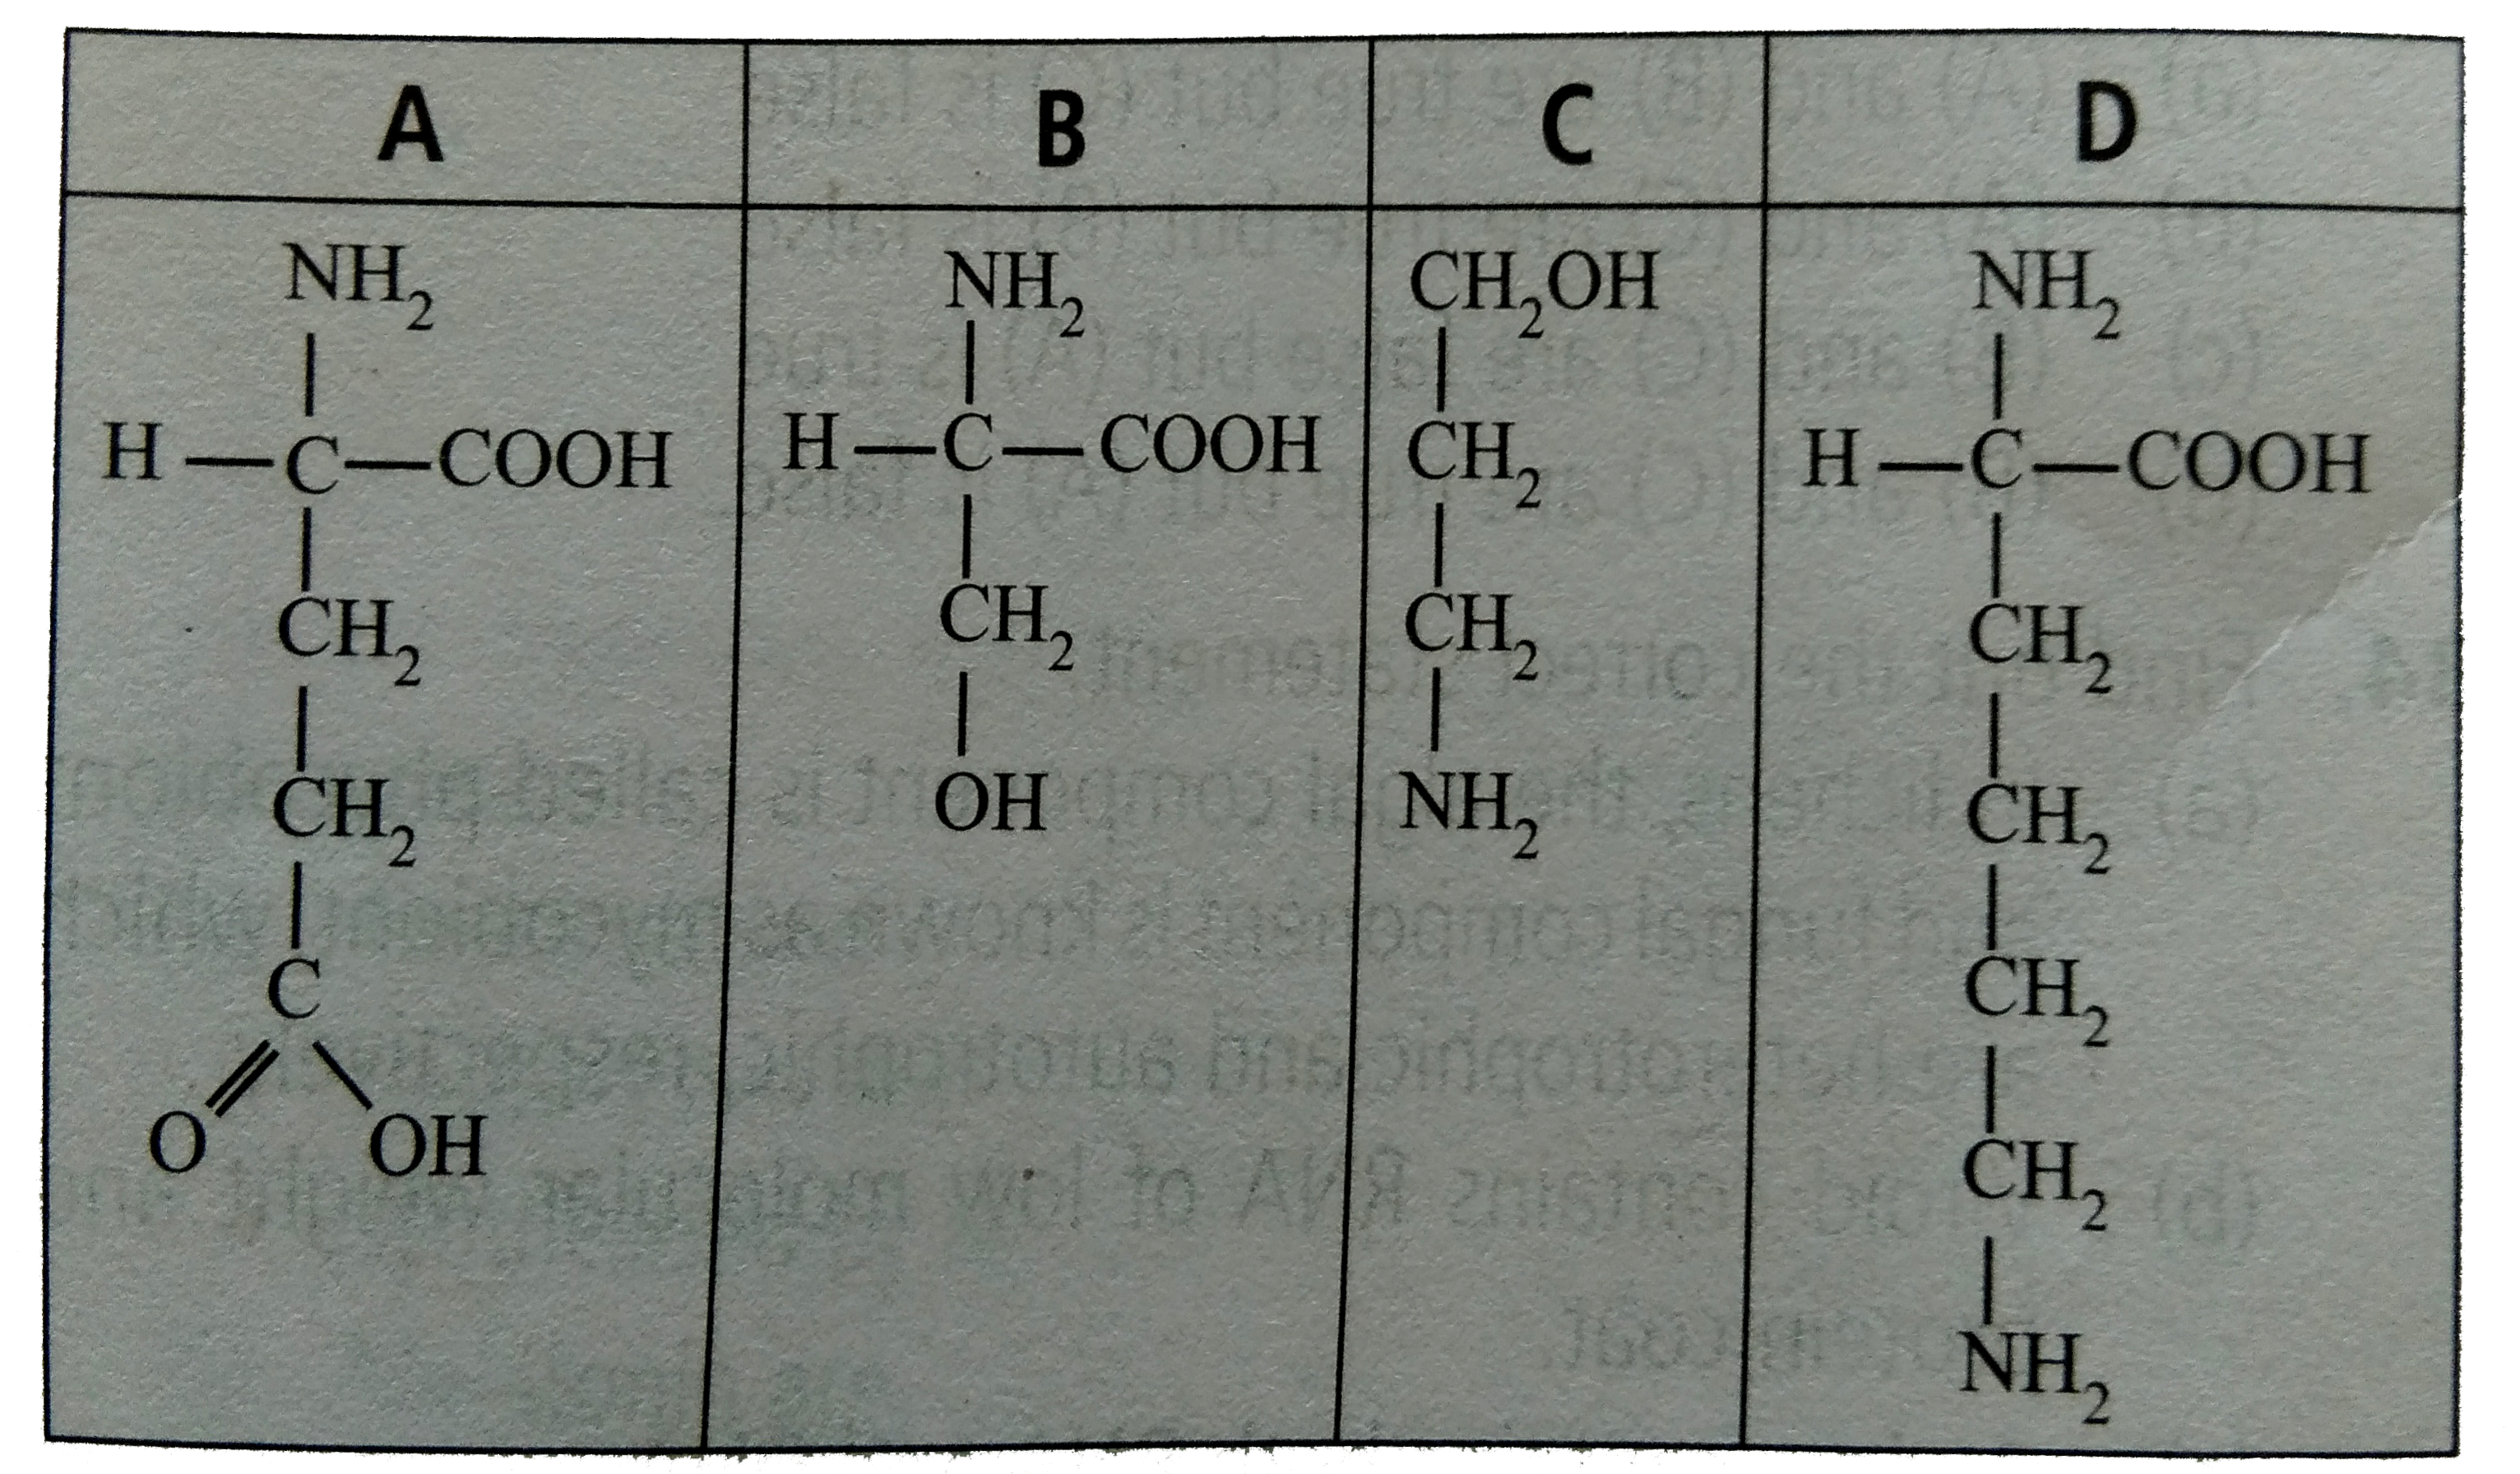 Which one out of A-D given below correctly represents the structural formula of a basic amino acid ?